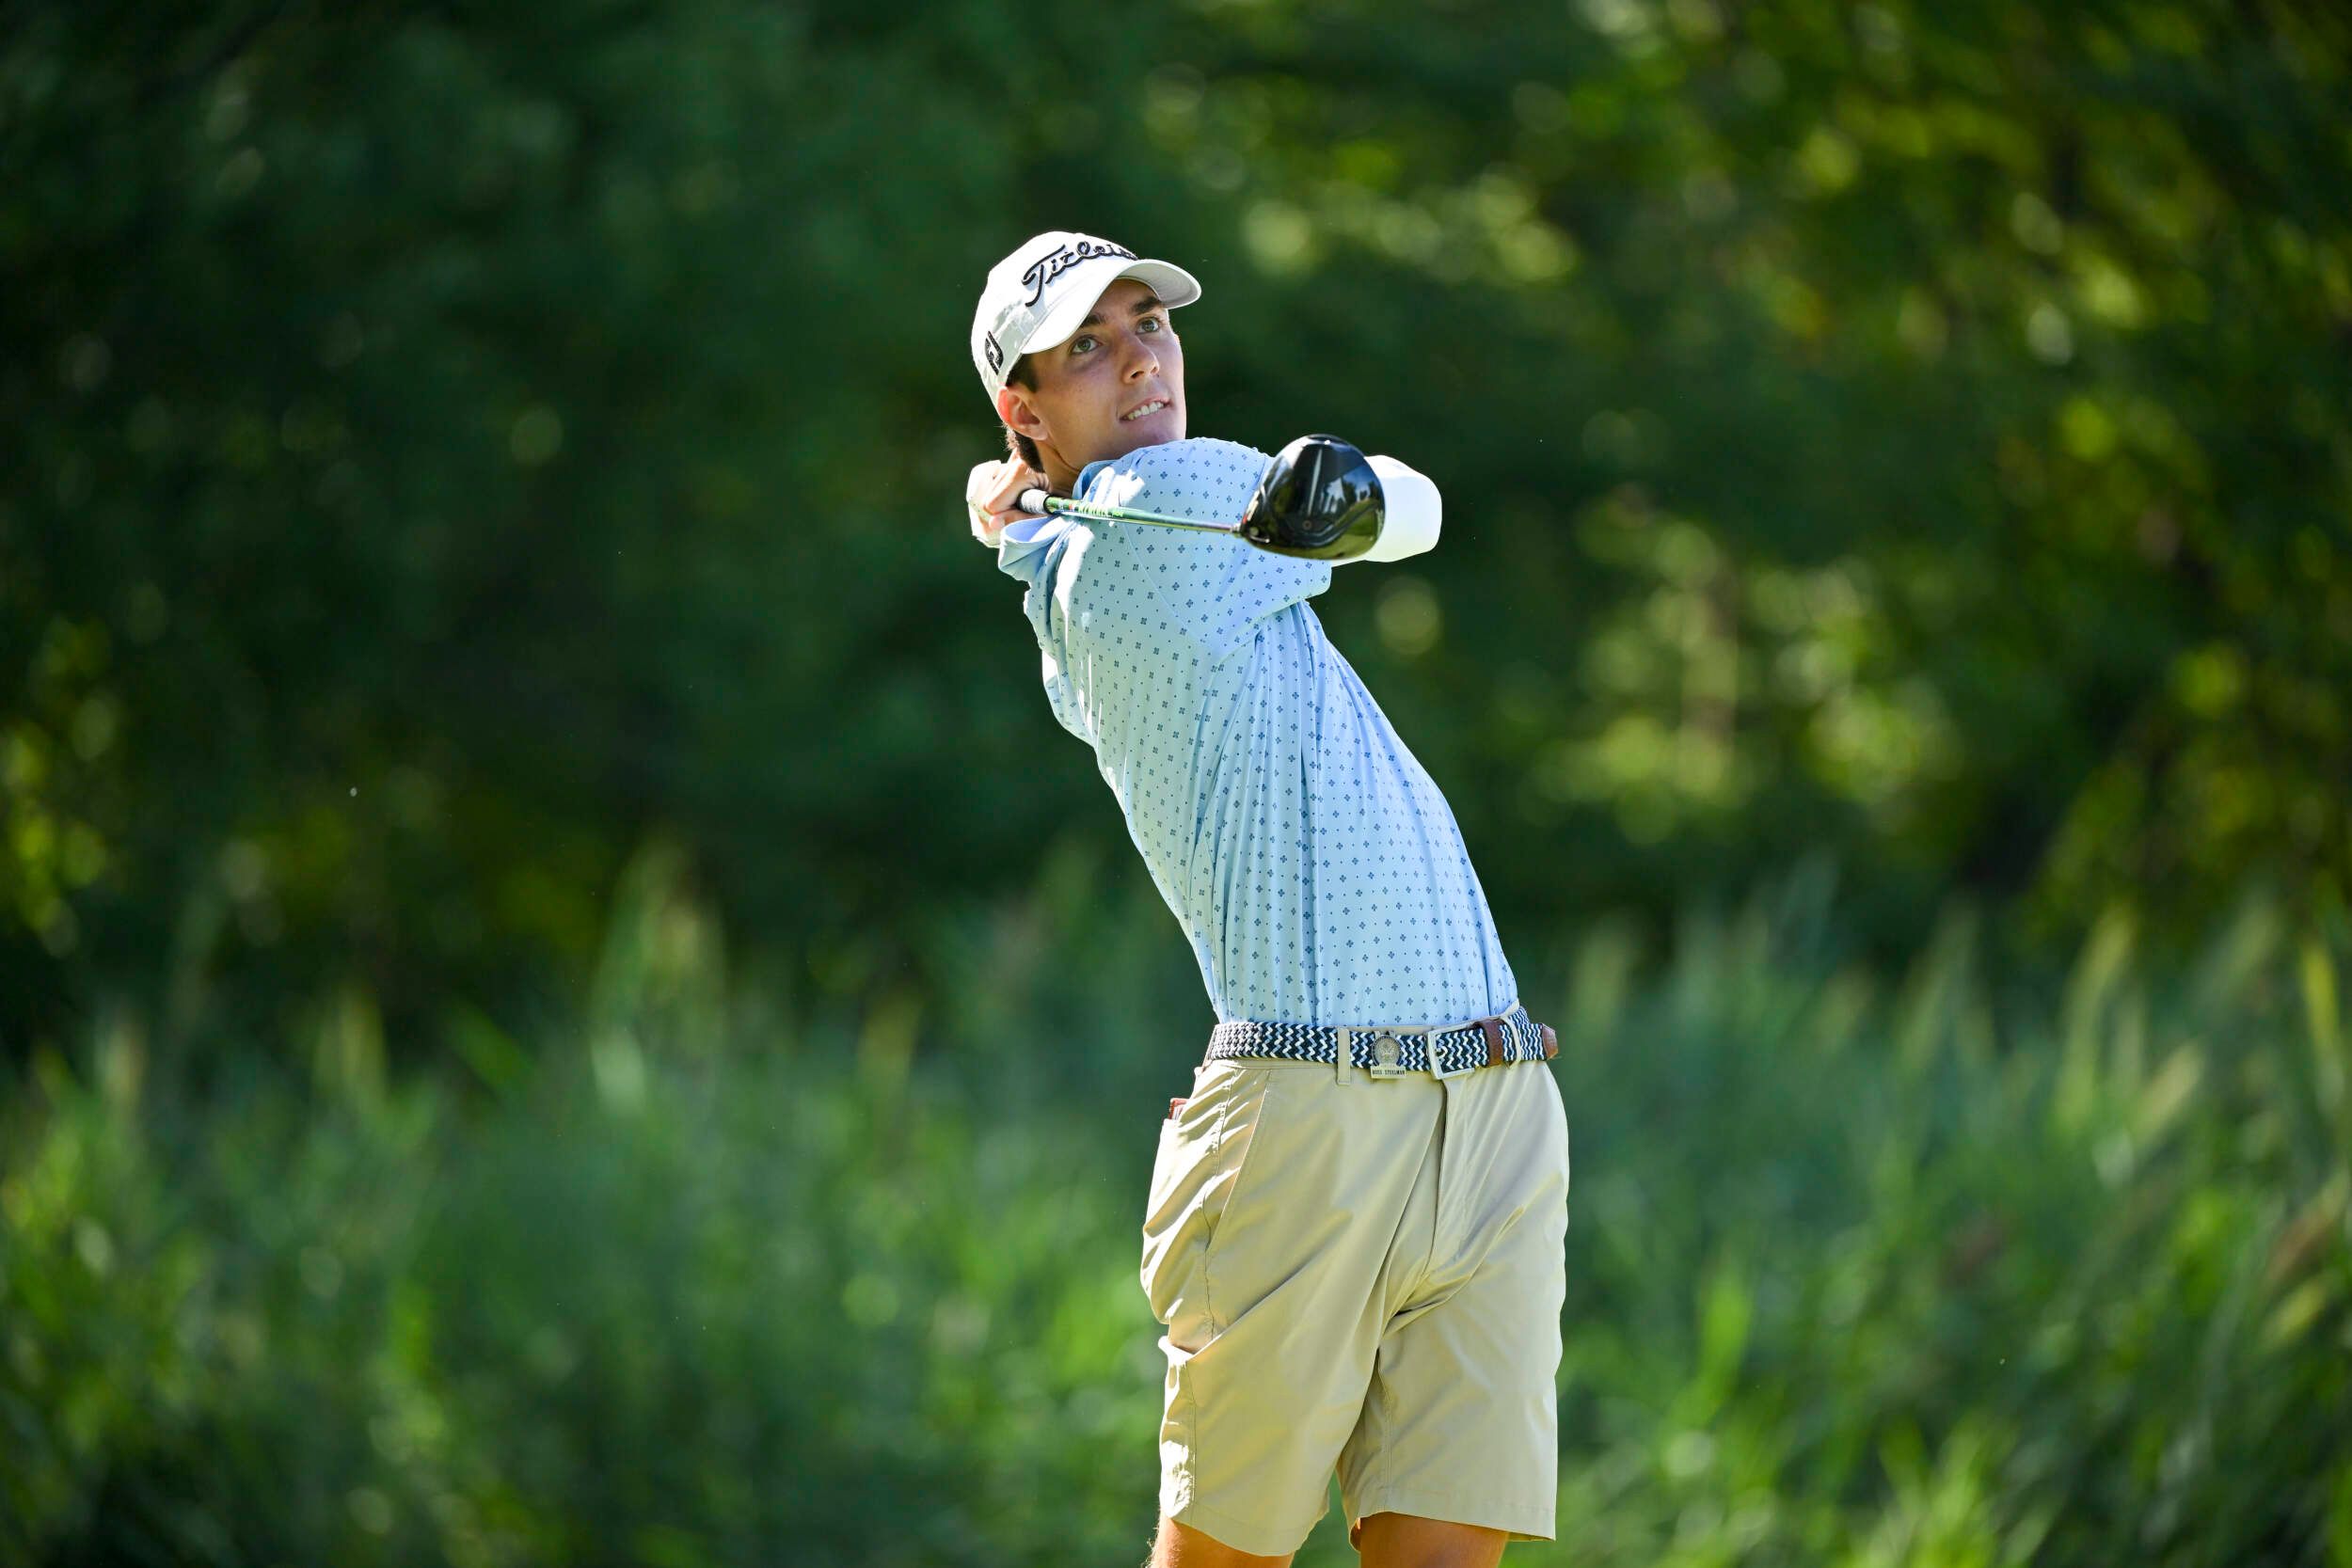 All Three Jackets Advance to Match Play at image